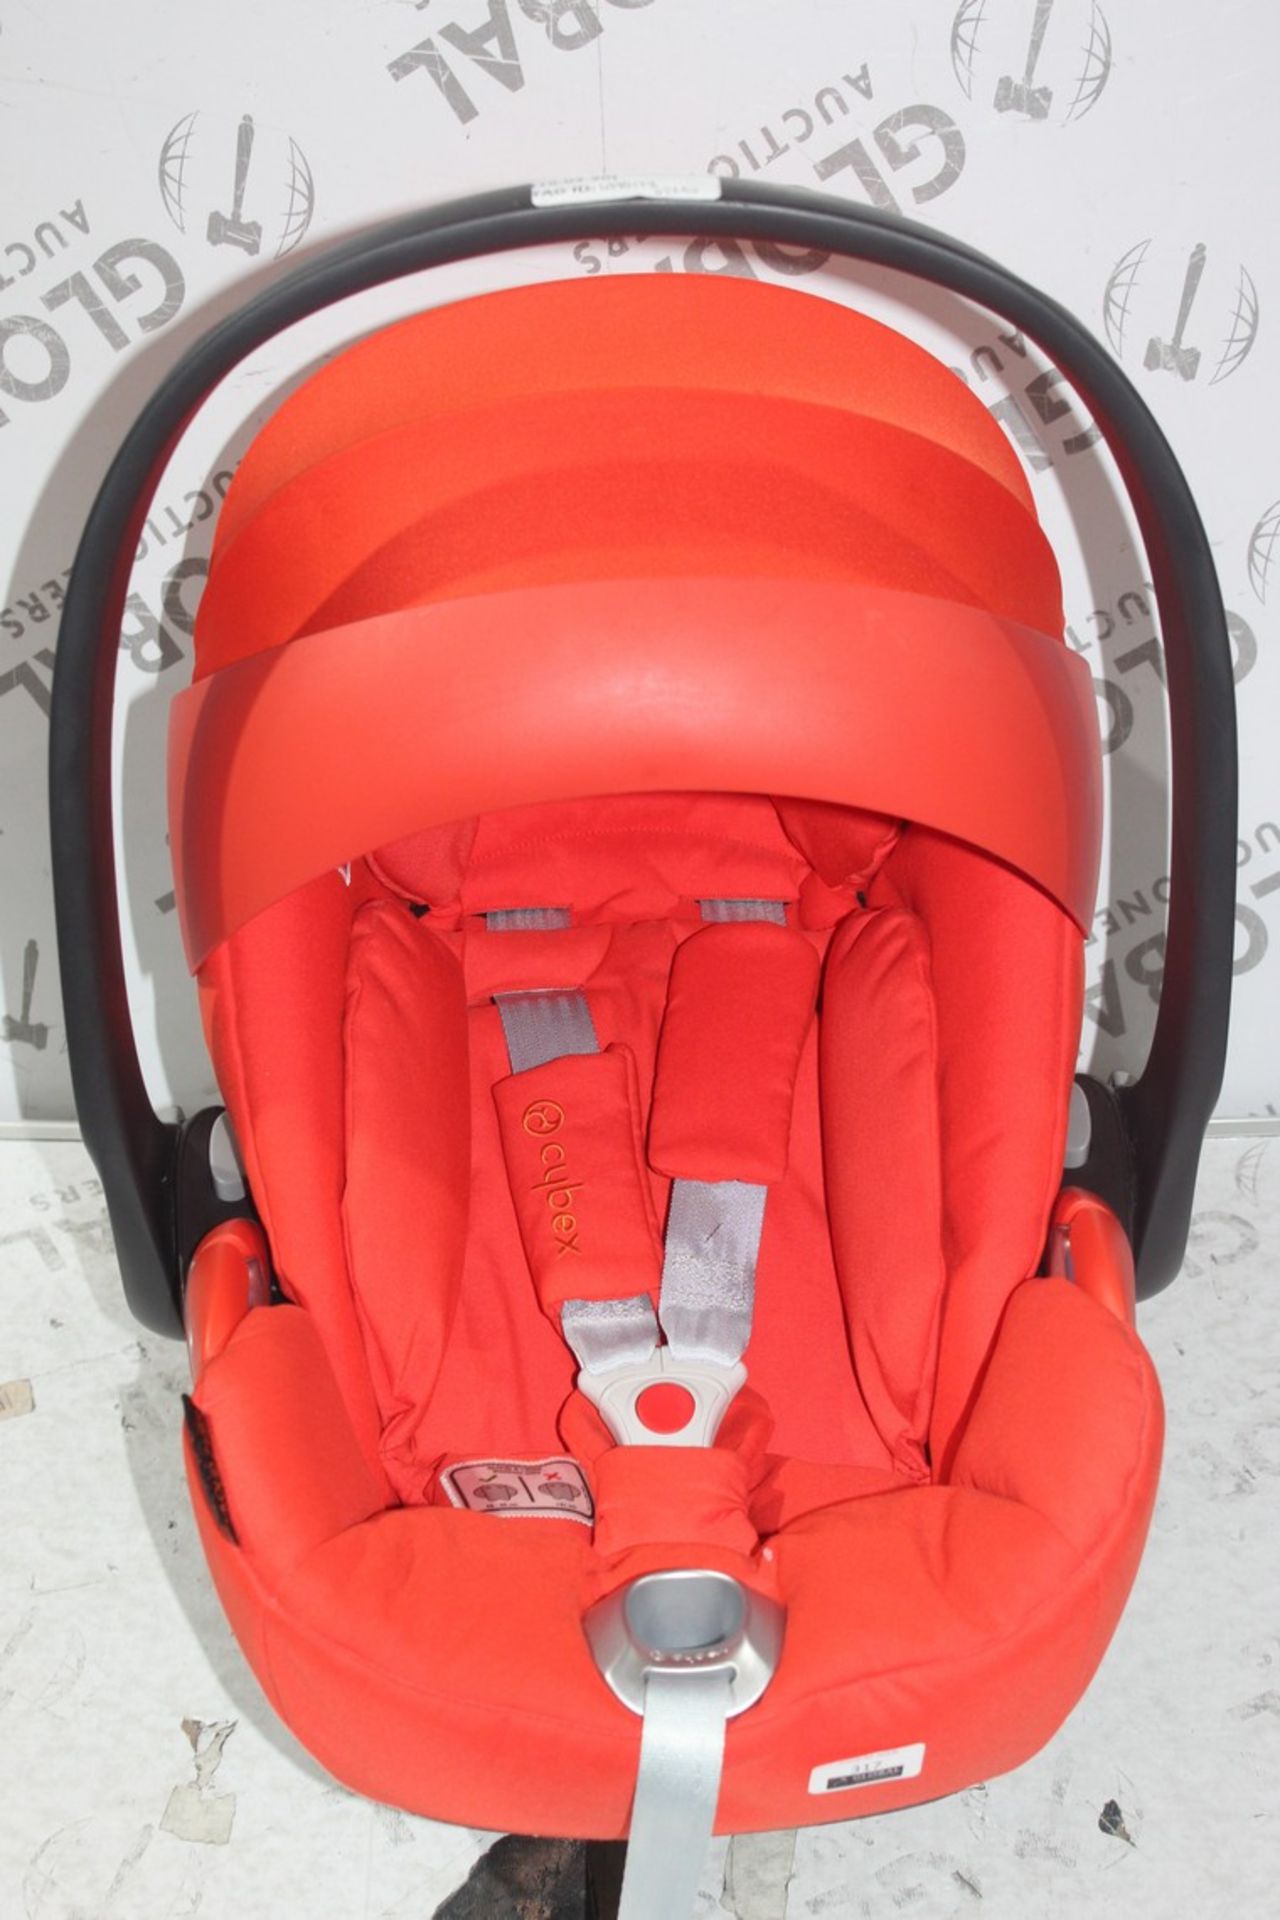 Cybex Platinum In Car Safety Seat In Orange RRP £225 (4990198). (Public Viewings & Appraisals